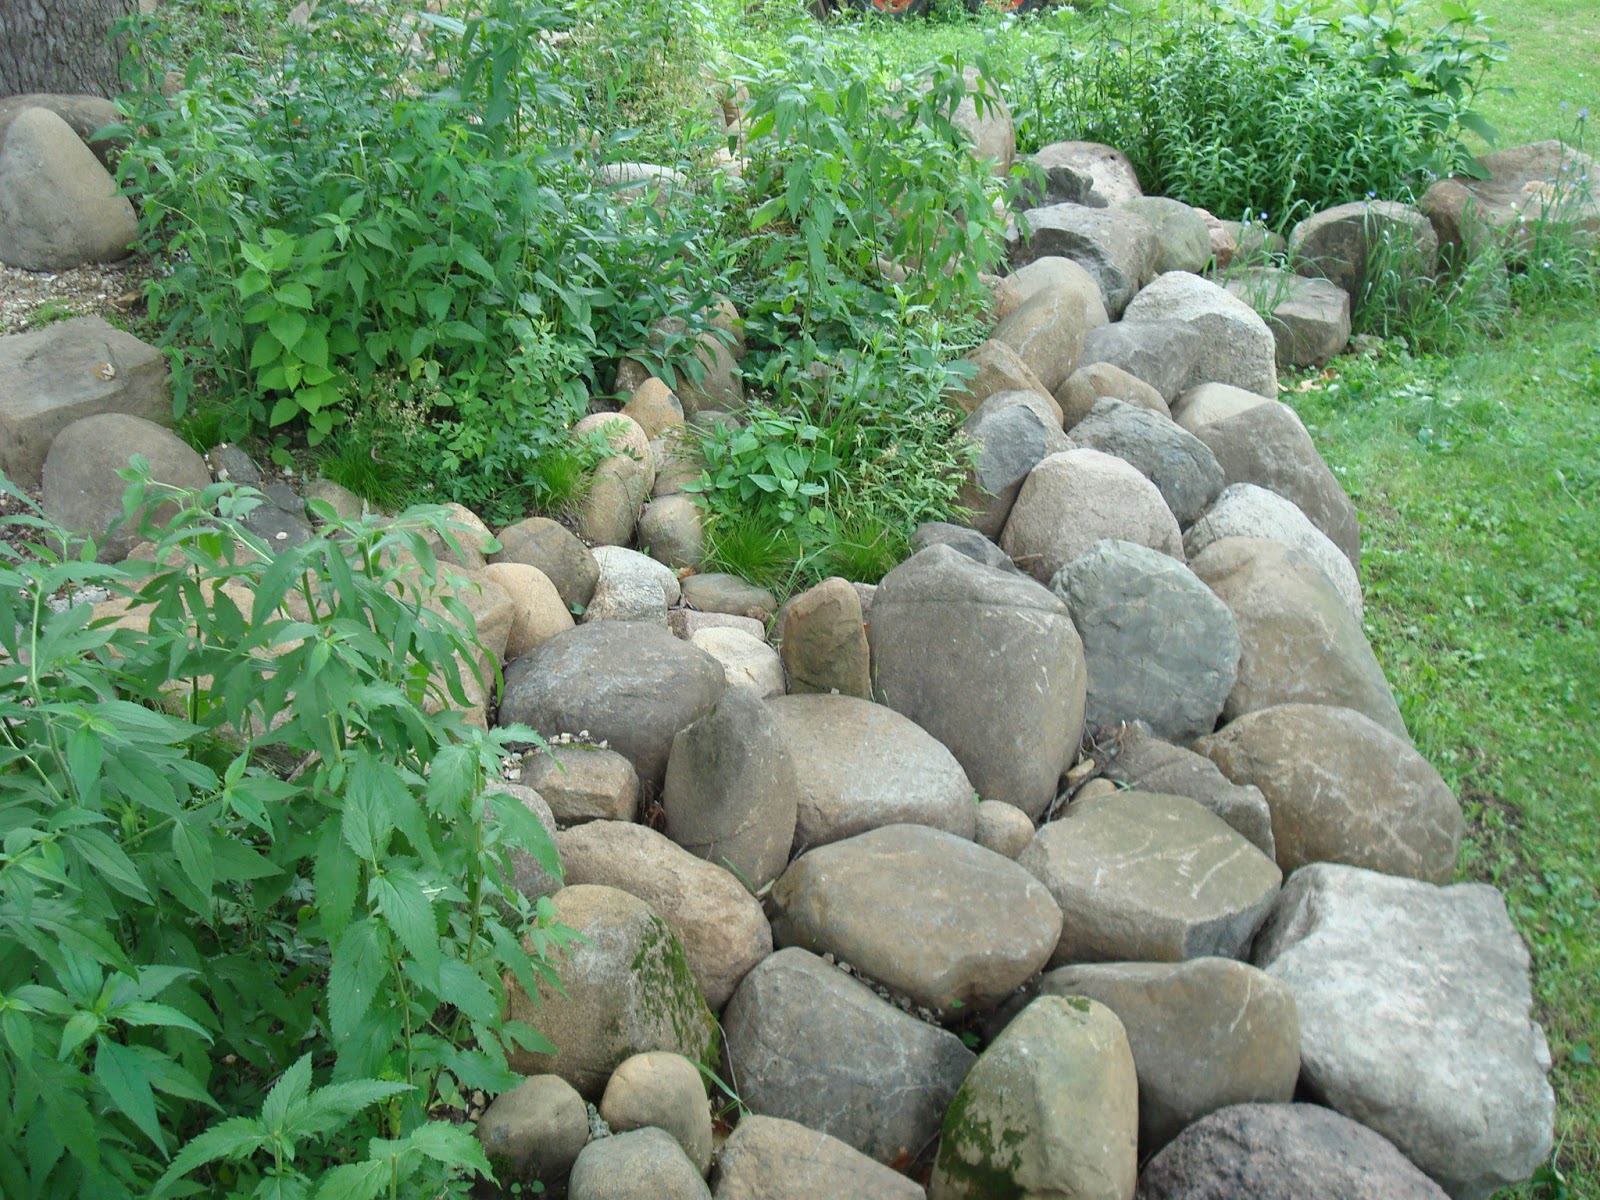 How to Dispose of Landscaping Rocks